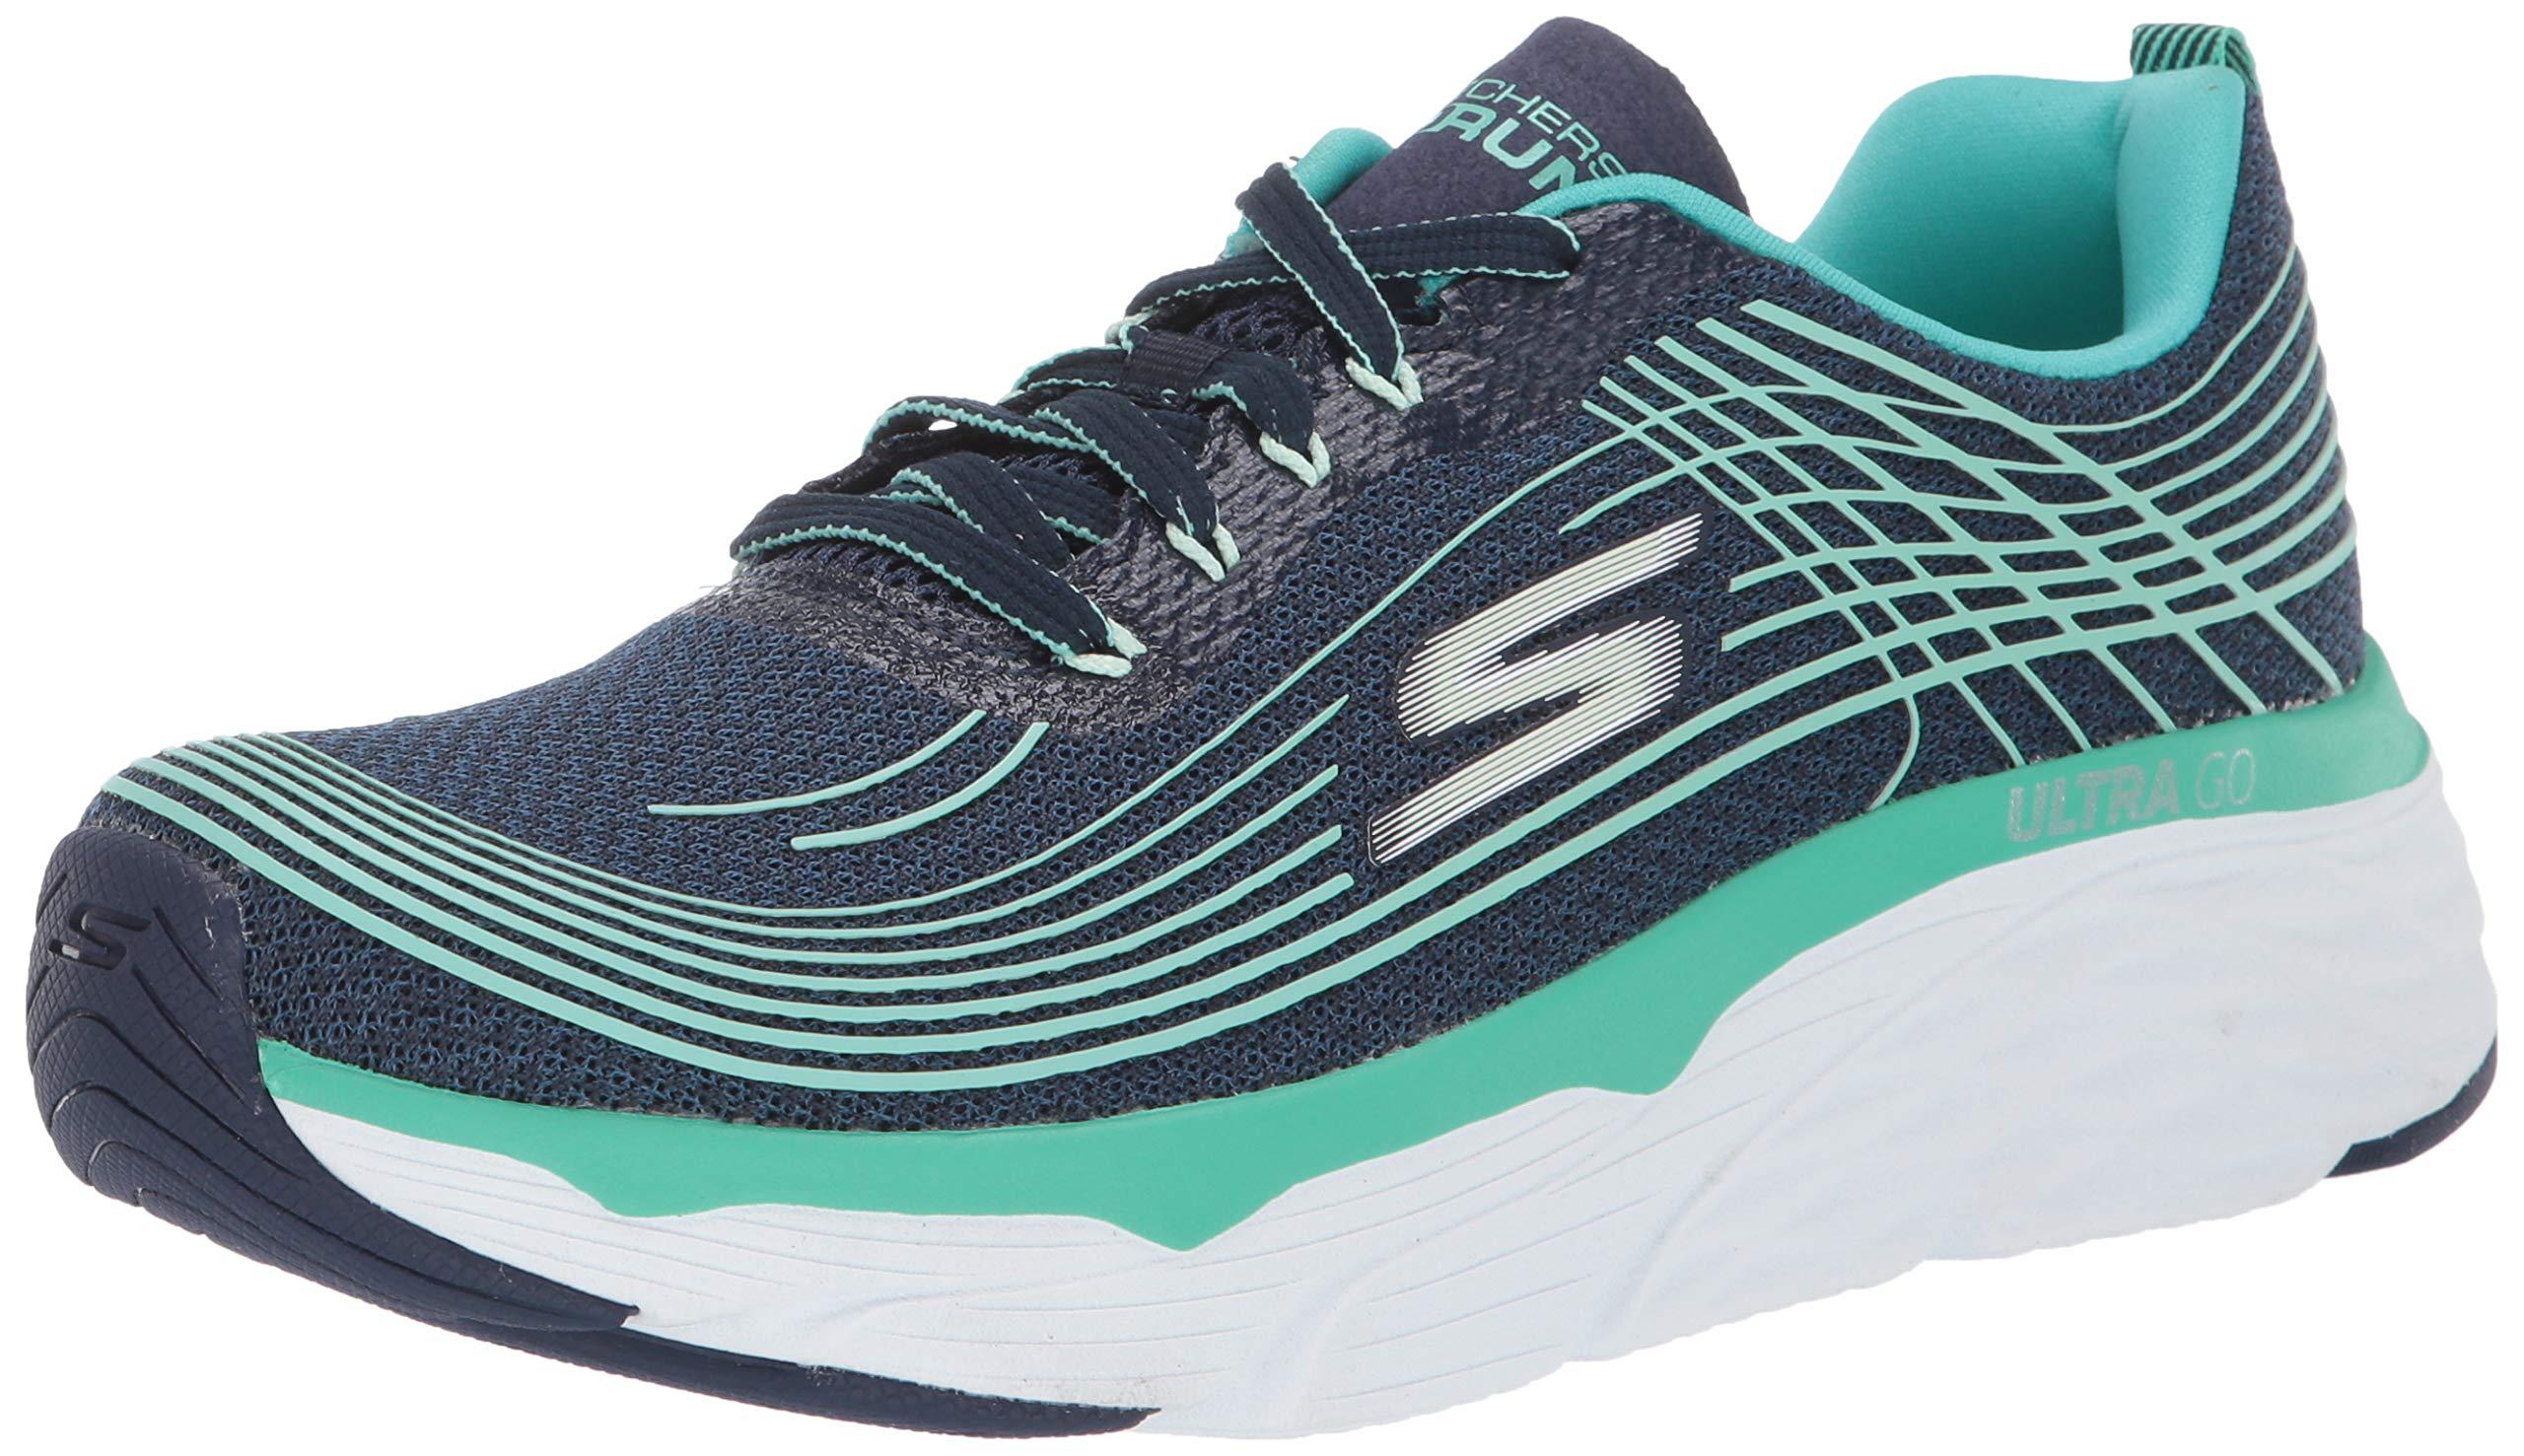 Skechers Max Cushion-17693 Sneaker in Navy/Turquoise (Blue) - Lyst